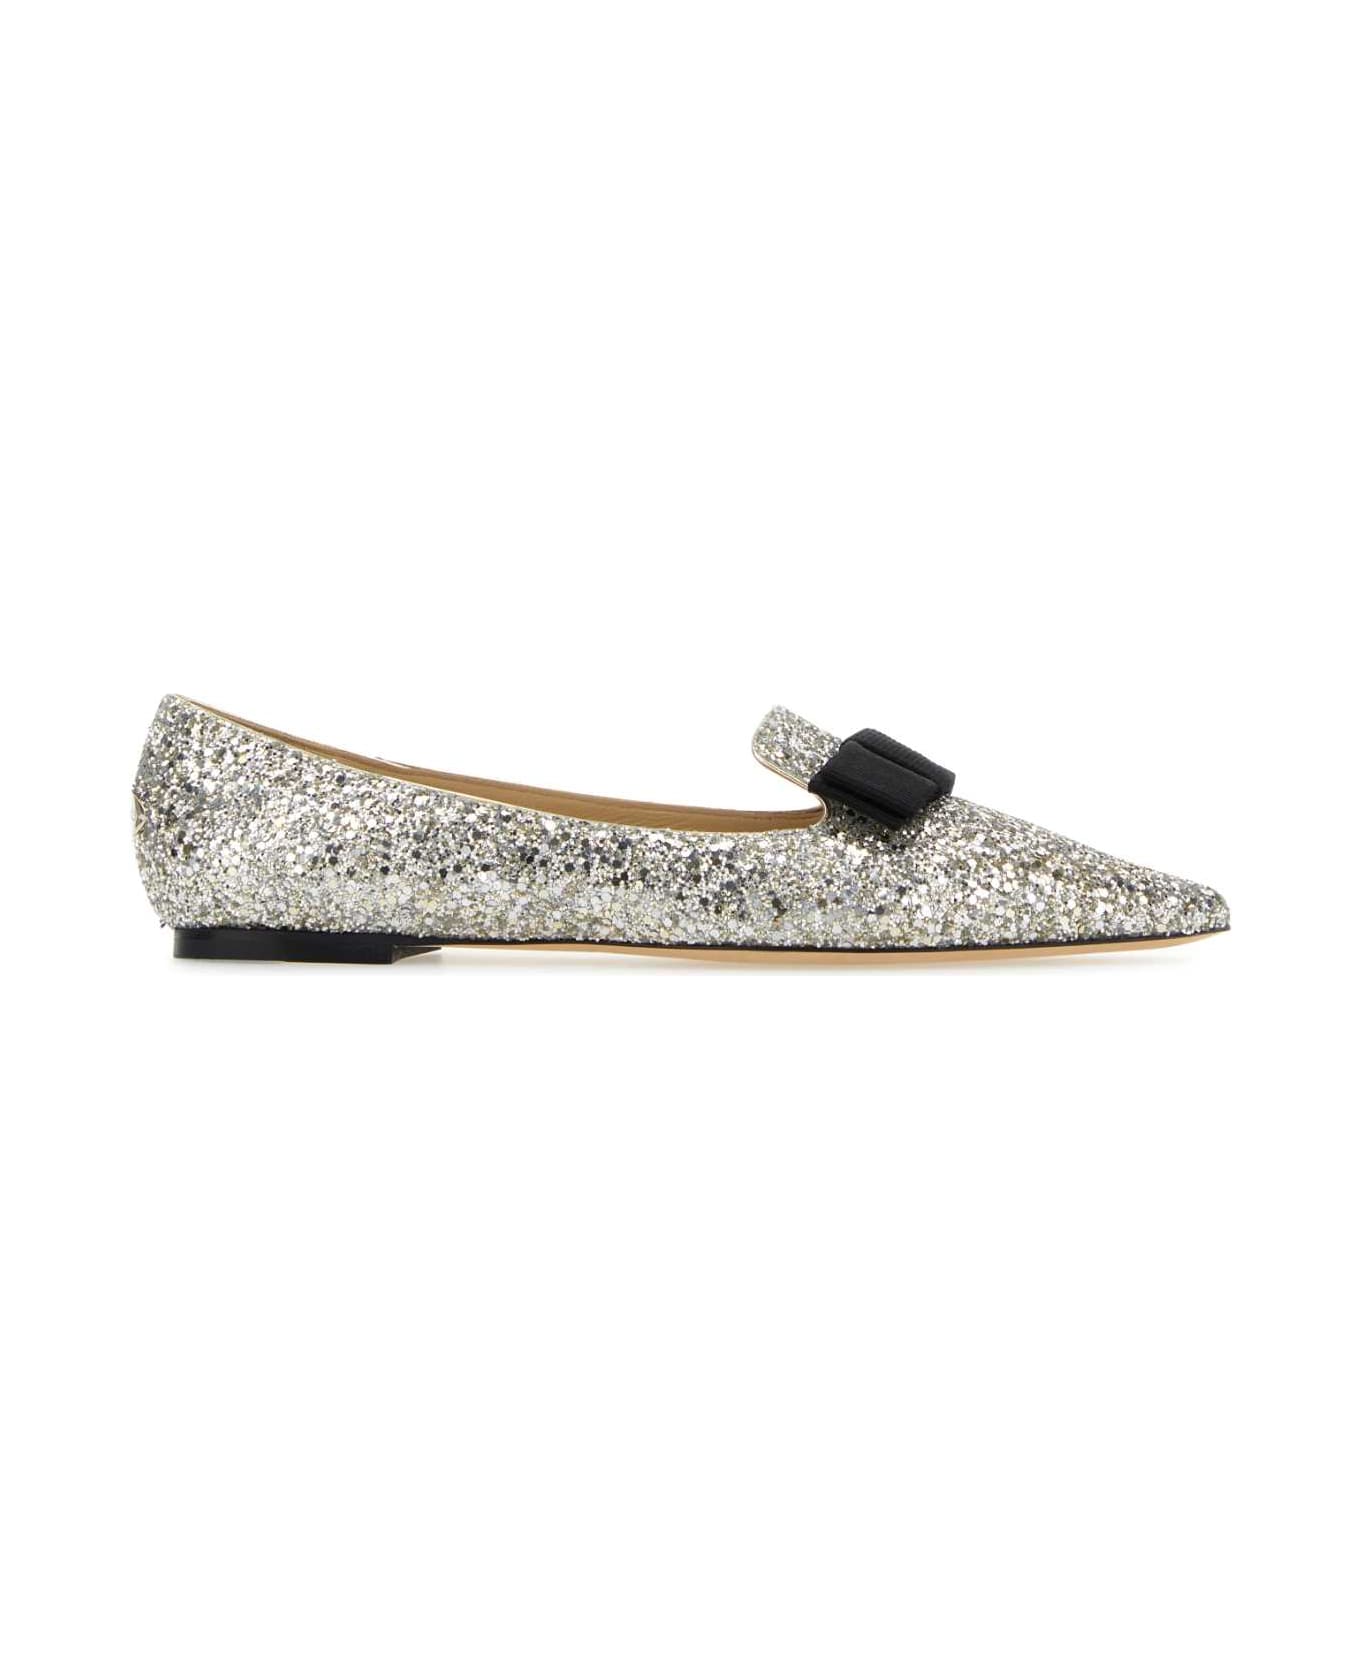 Jimmy Choo Embellished Fabric And Leather Gala Ballerinas - CHAMPAGNE